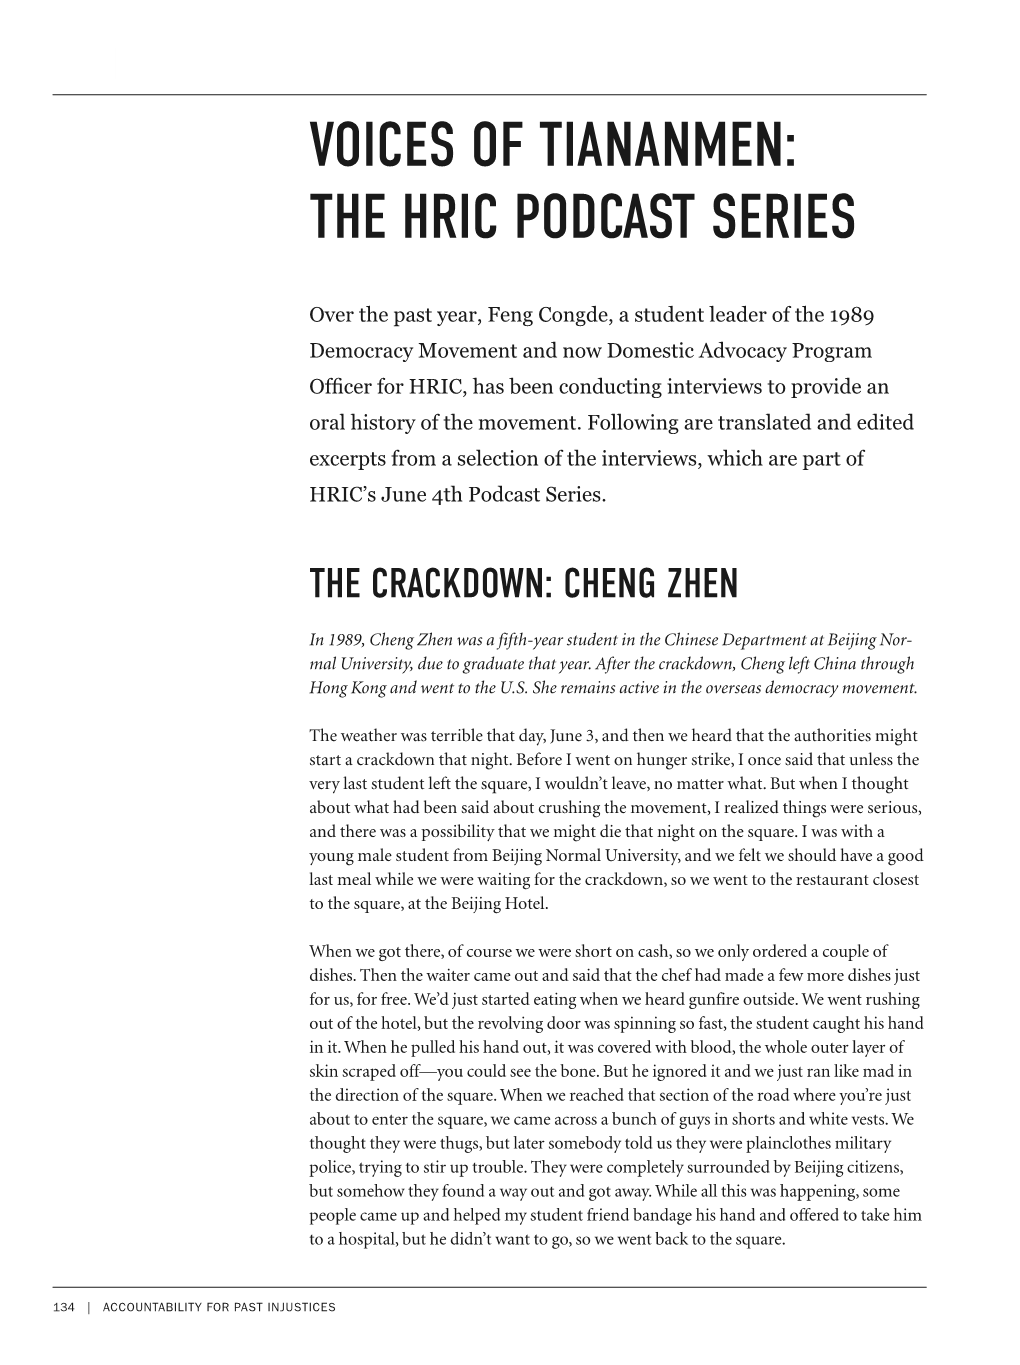 The Hric Podcast Series